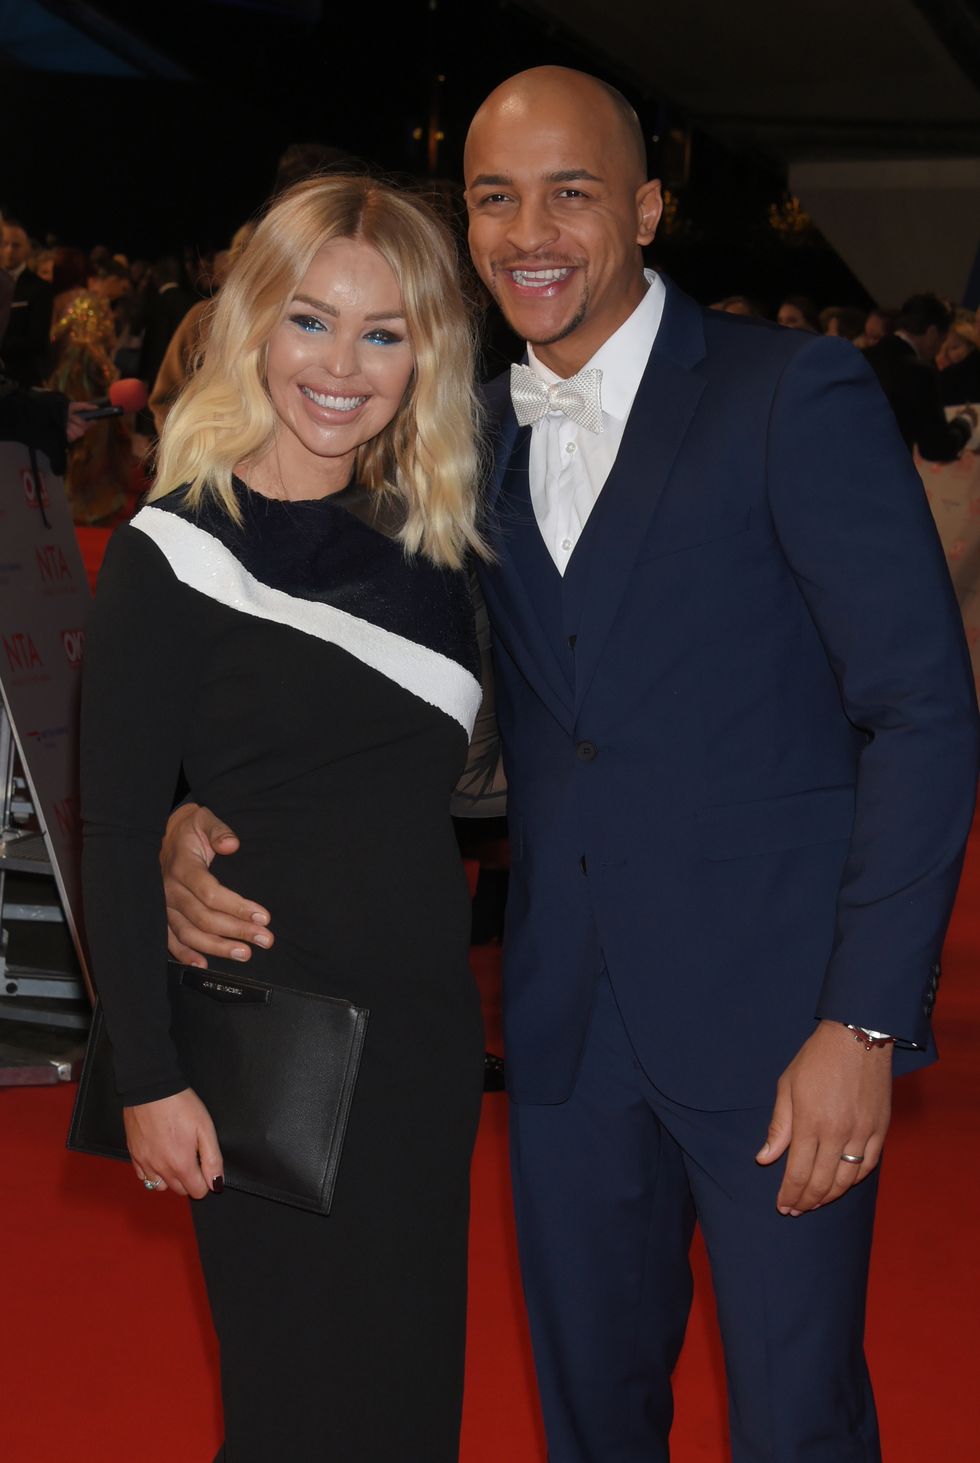 Katie Piper and husband Richard James Sutton